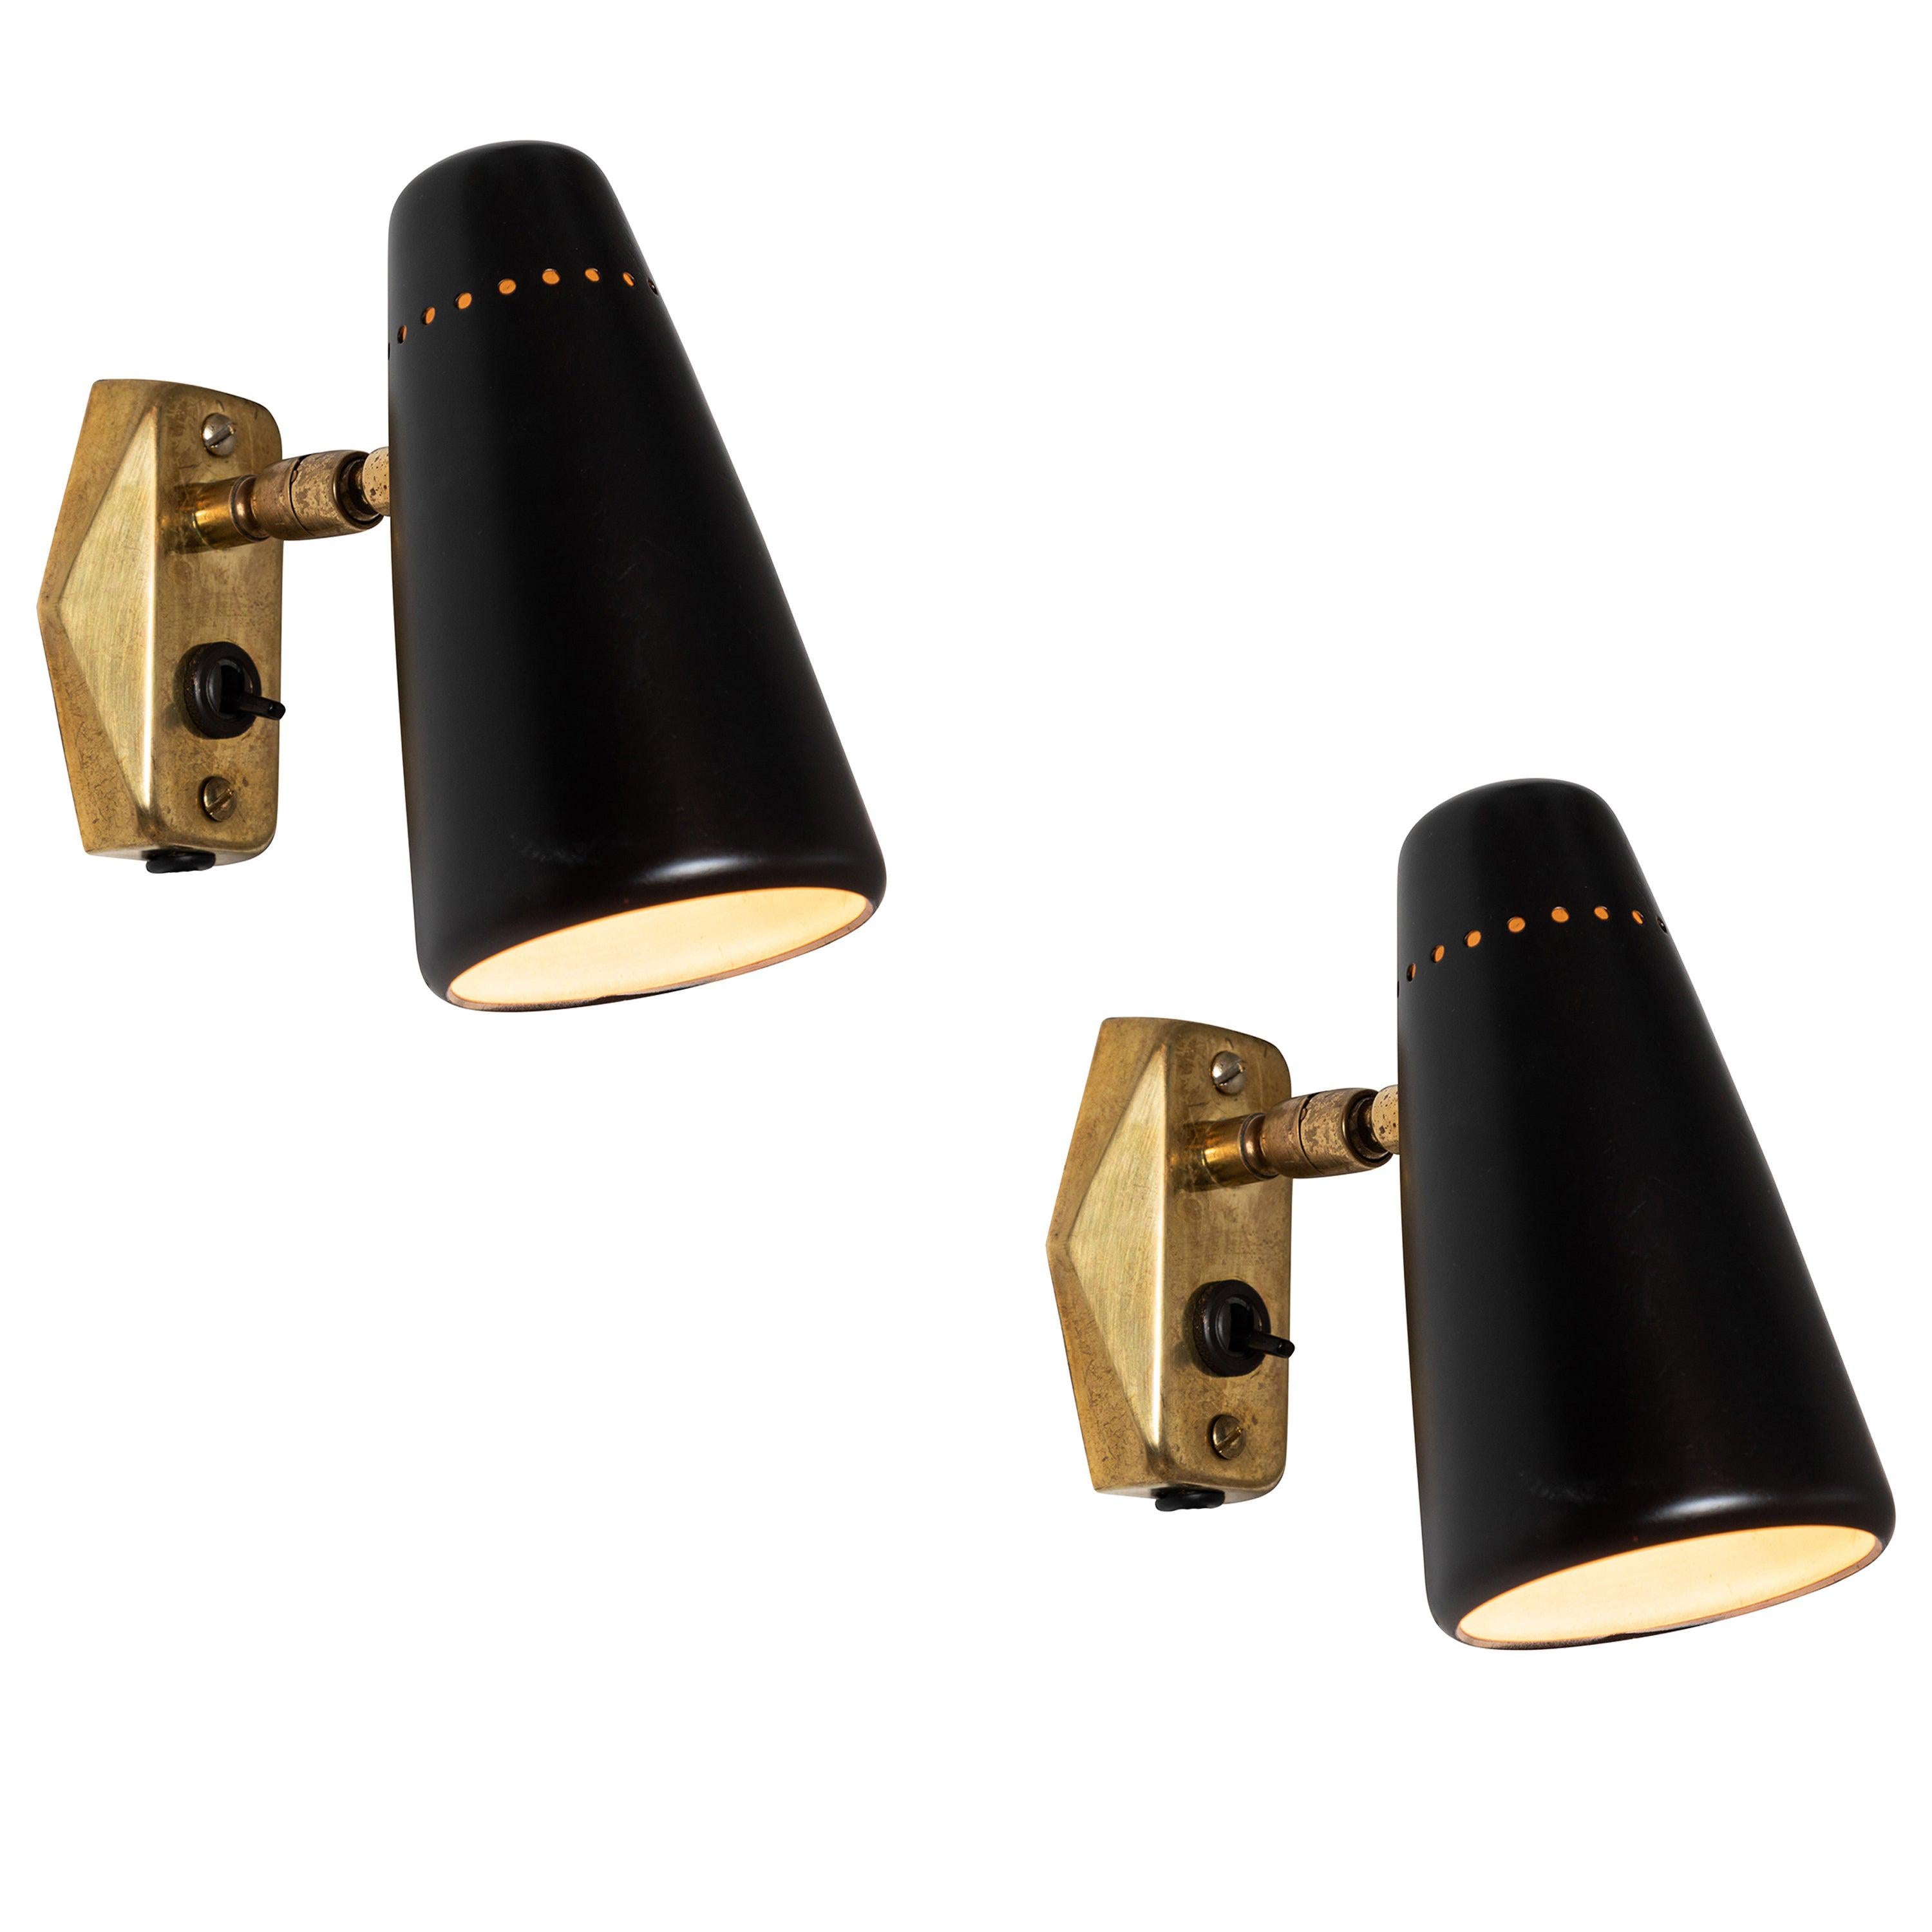 1950s Stilnovo black and brass wall light. A quintessentially 1950s Italian design executed in black painted metal with original Italian backplates, black cloth cord and US period styled wall plug. Shades can be rotated freely on a brass ball joint.